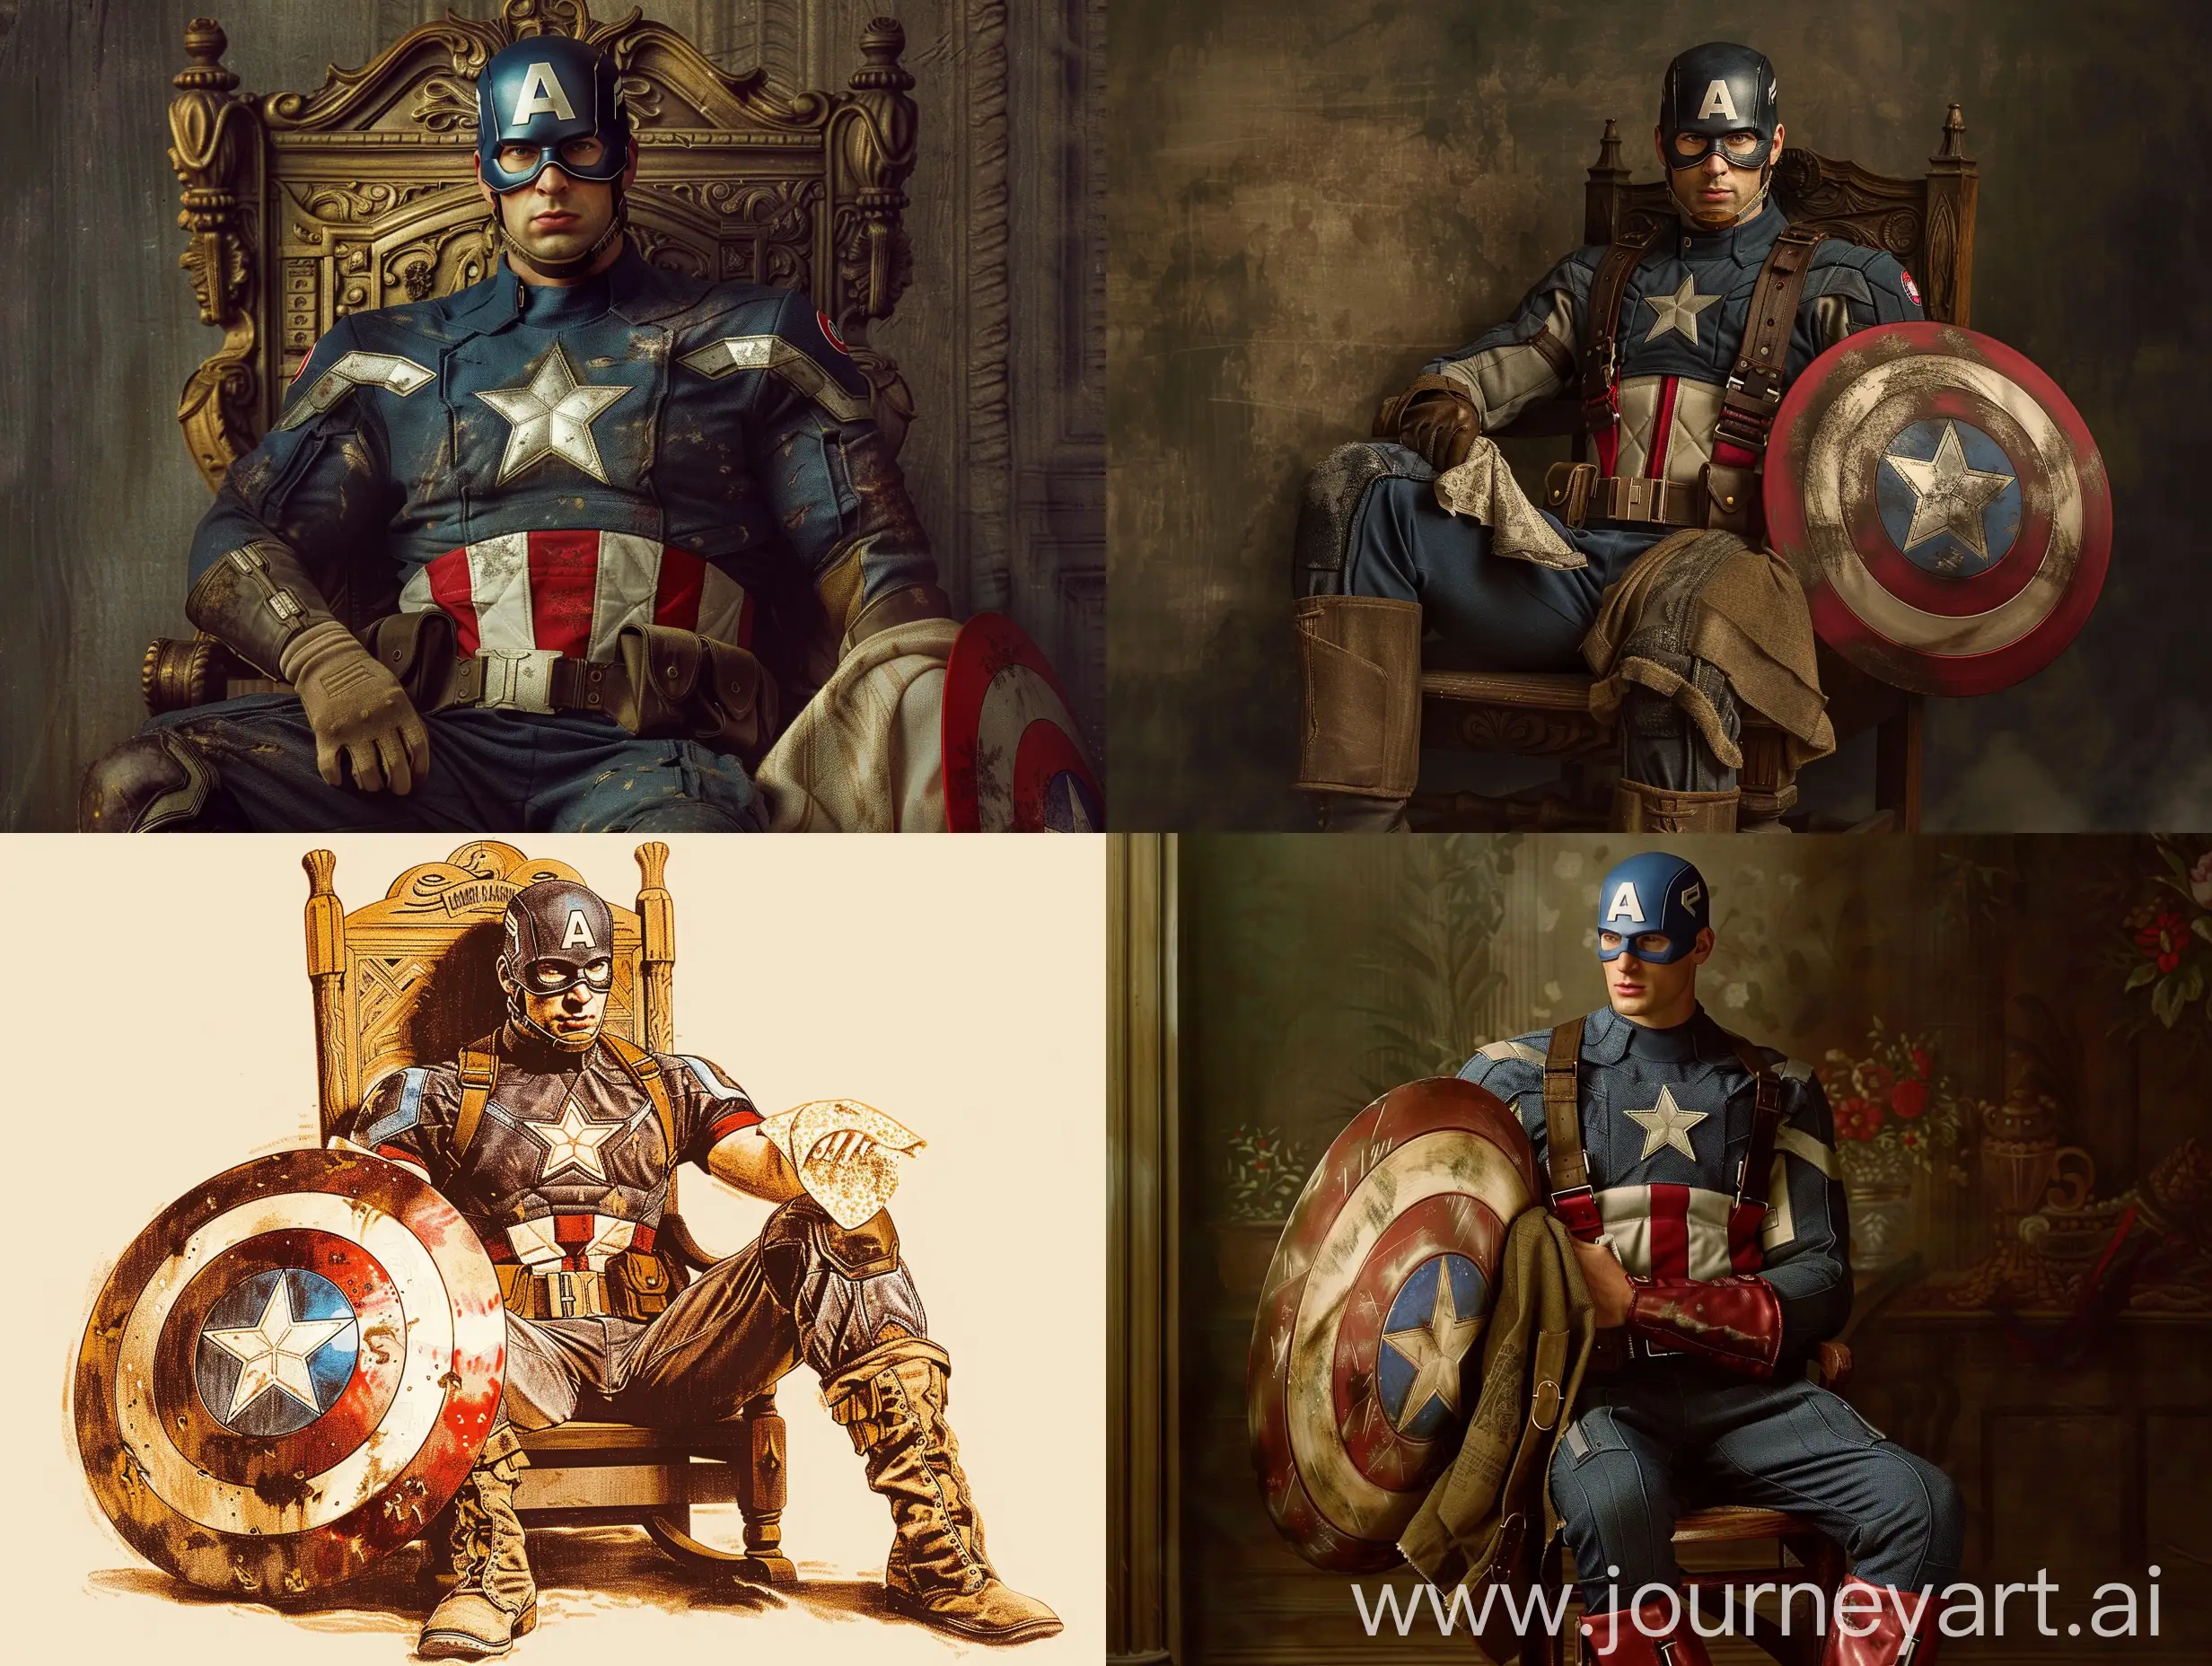 Crusader-Captain-America-in-80s-Military-Uniform-with-Castle-Shield-and-Handkerchief-at-Camelot-Palace